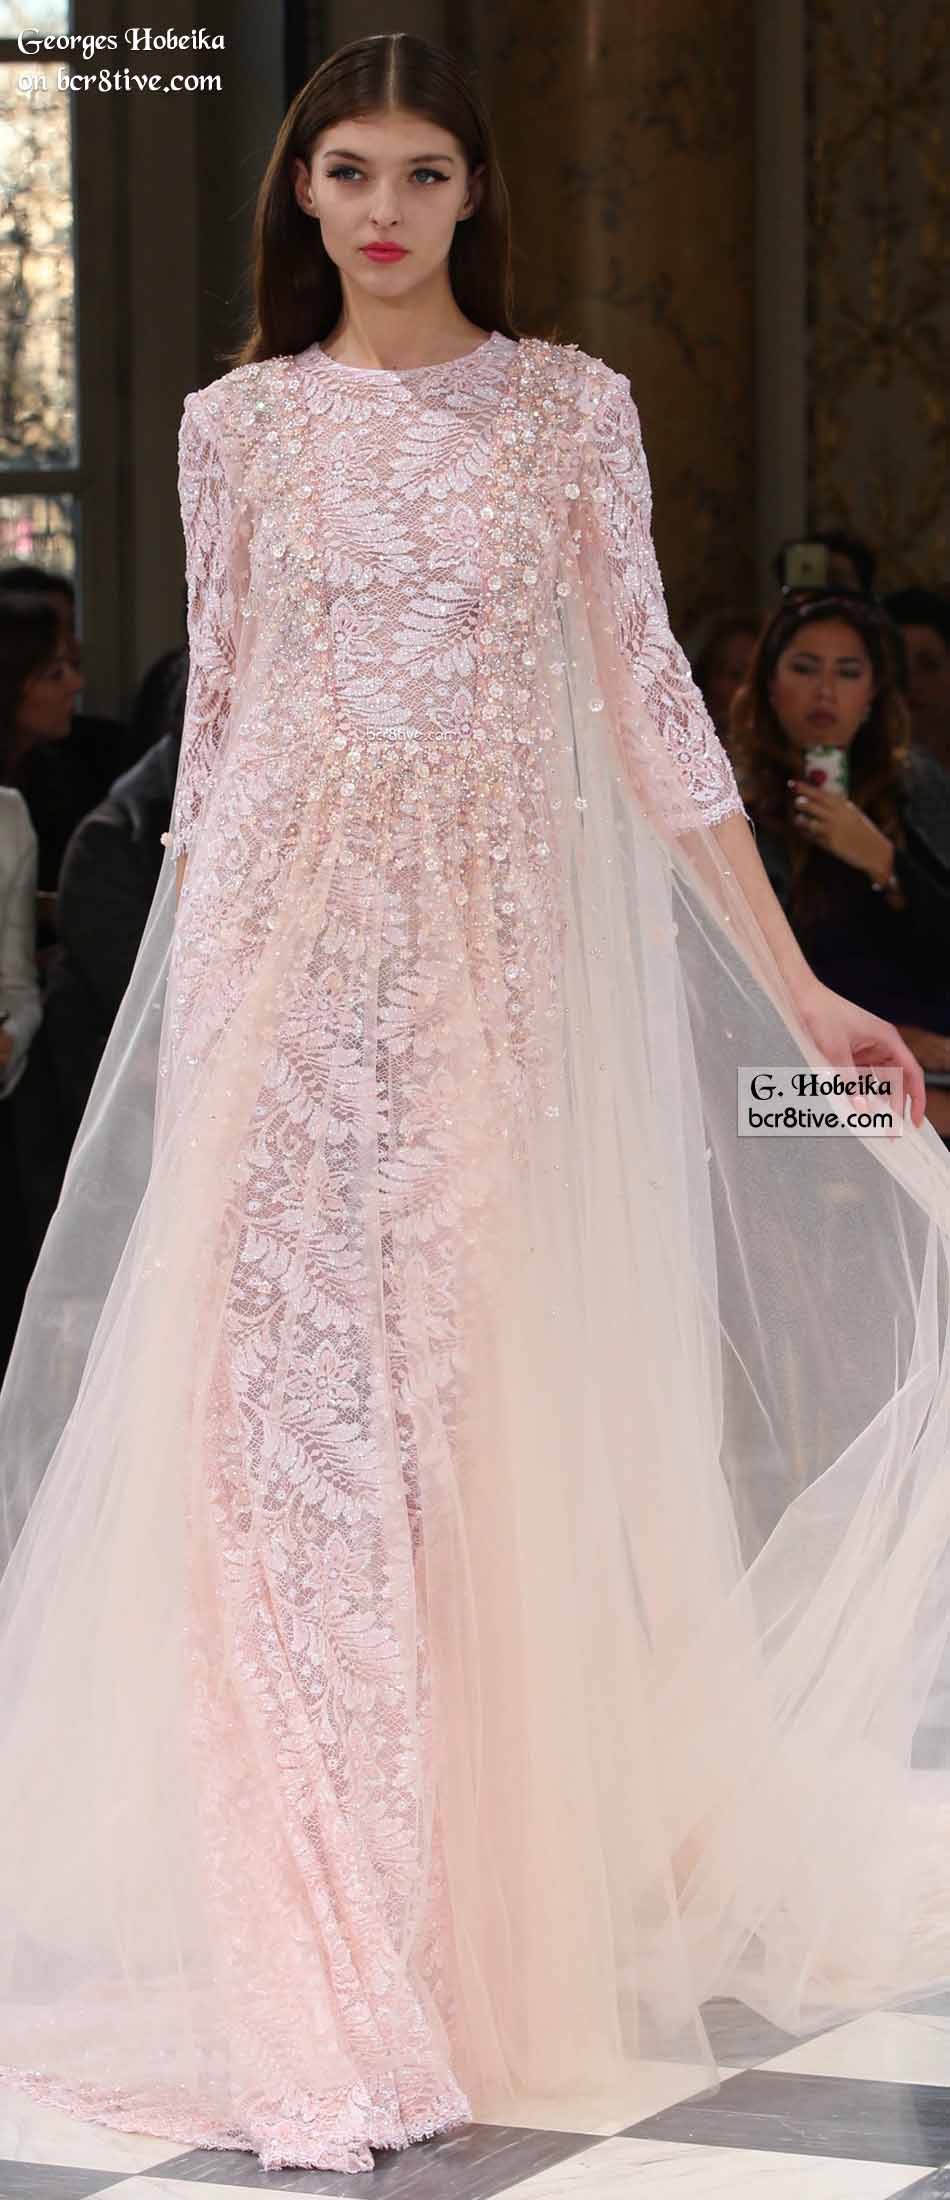 Georges Hobeika Spring 2016 Haute Couture – Be Creative